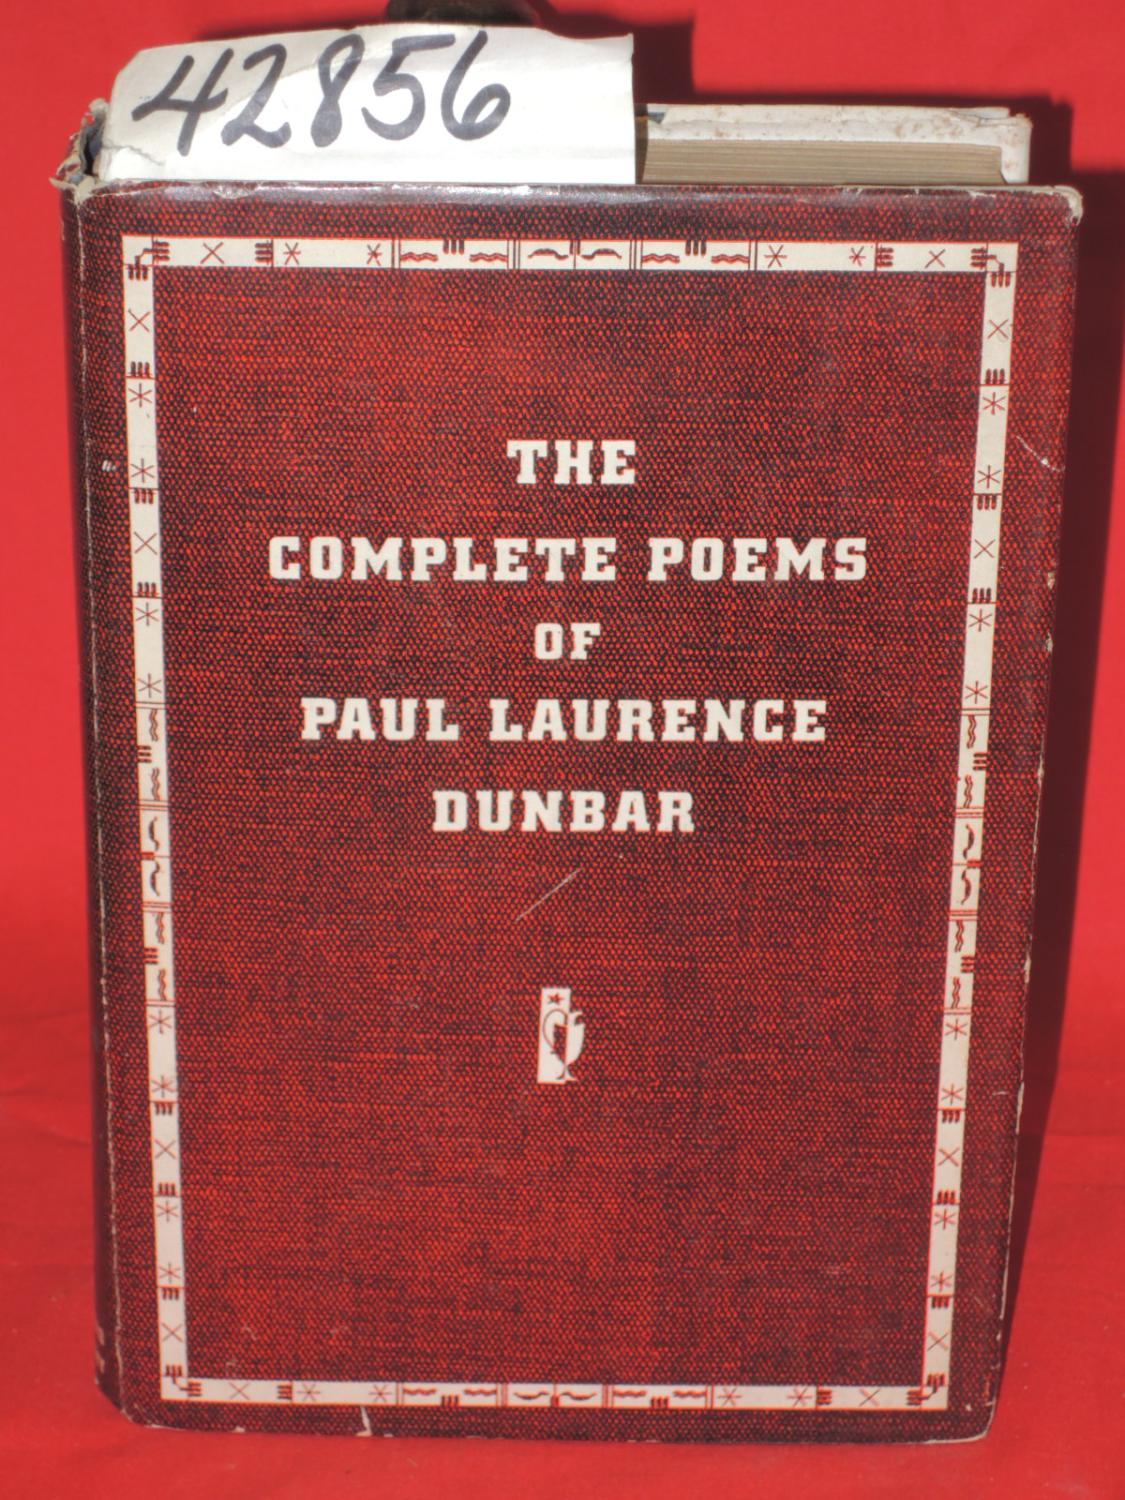 The Complete Poems of Paul Laurence Dunbar by Dunbar, Paul Laurence ...